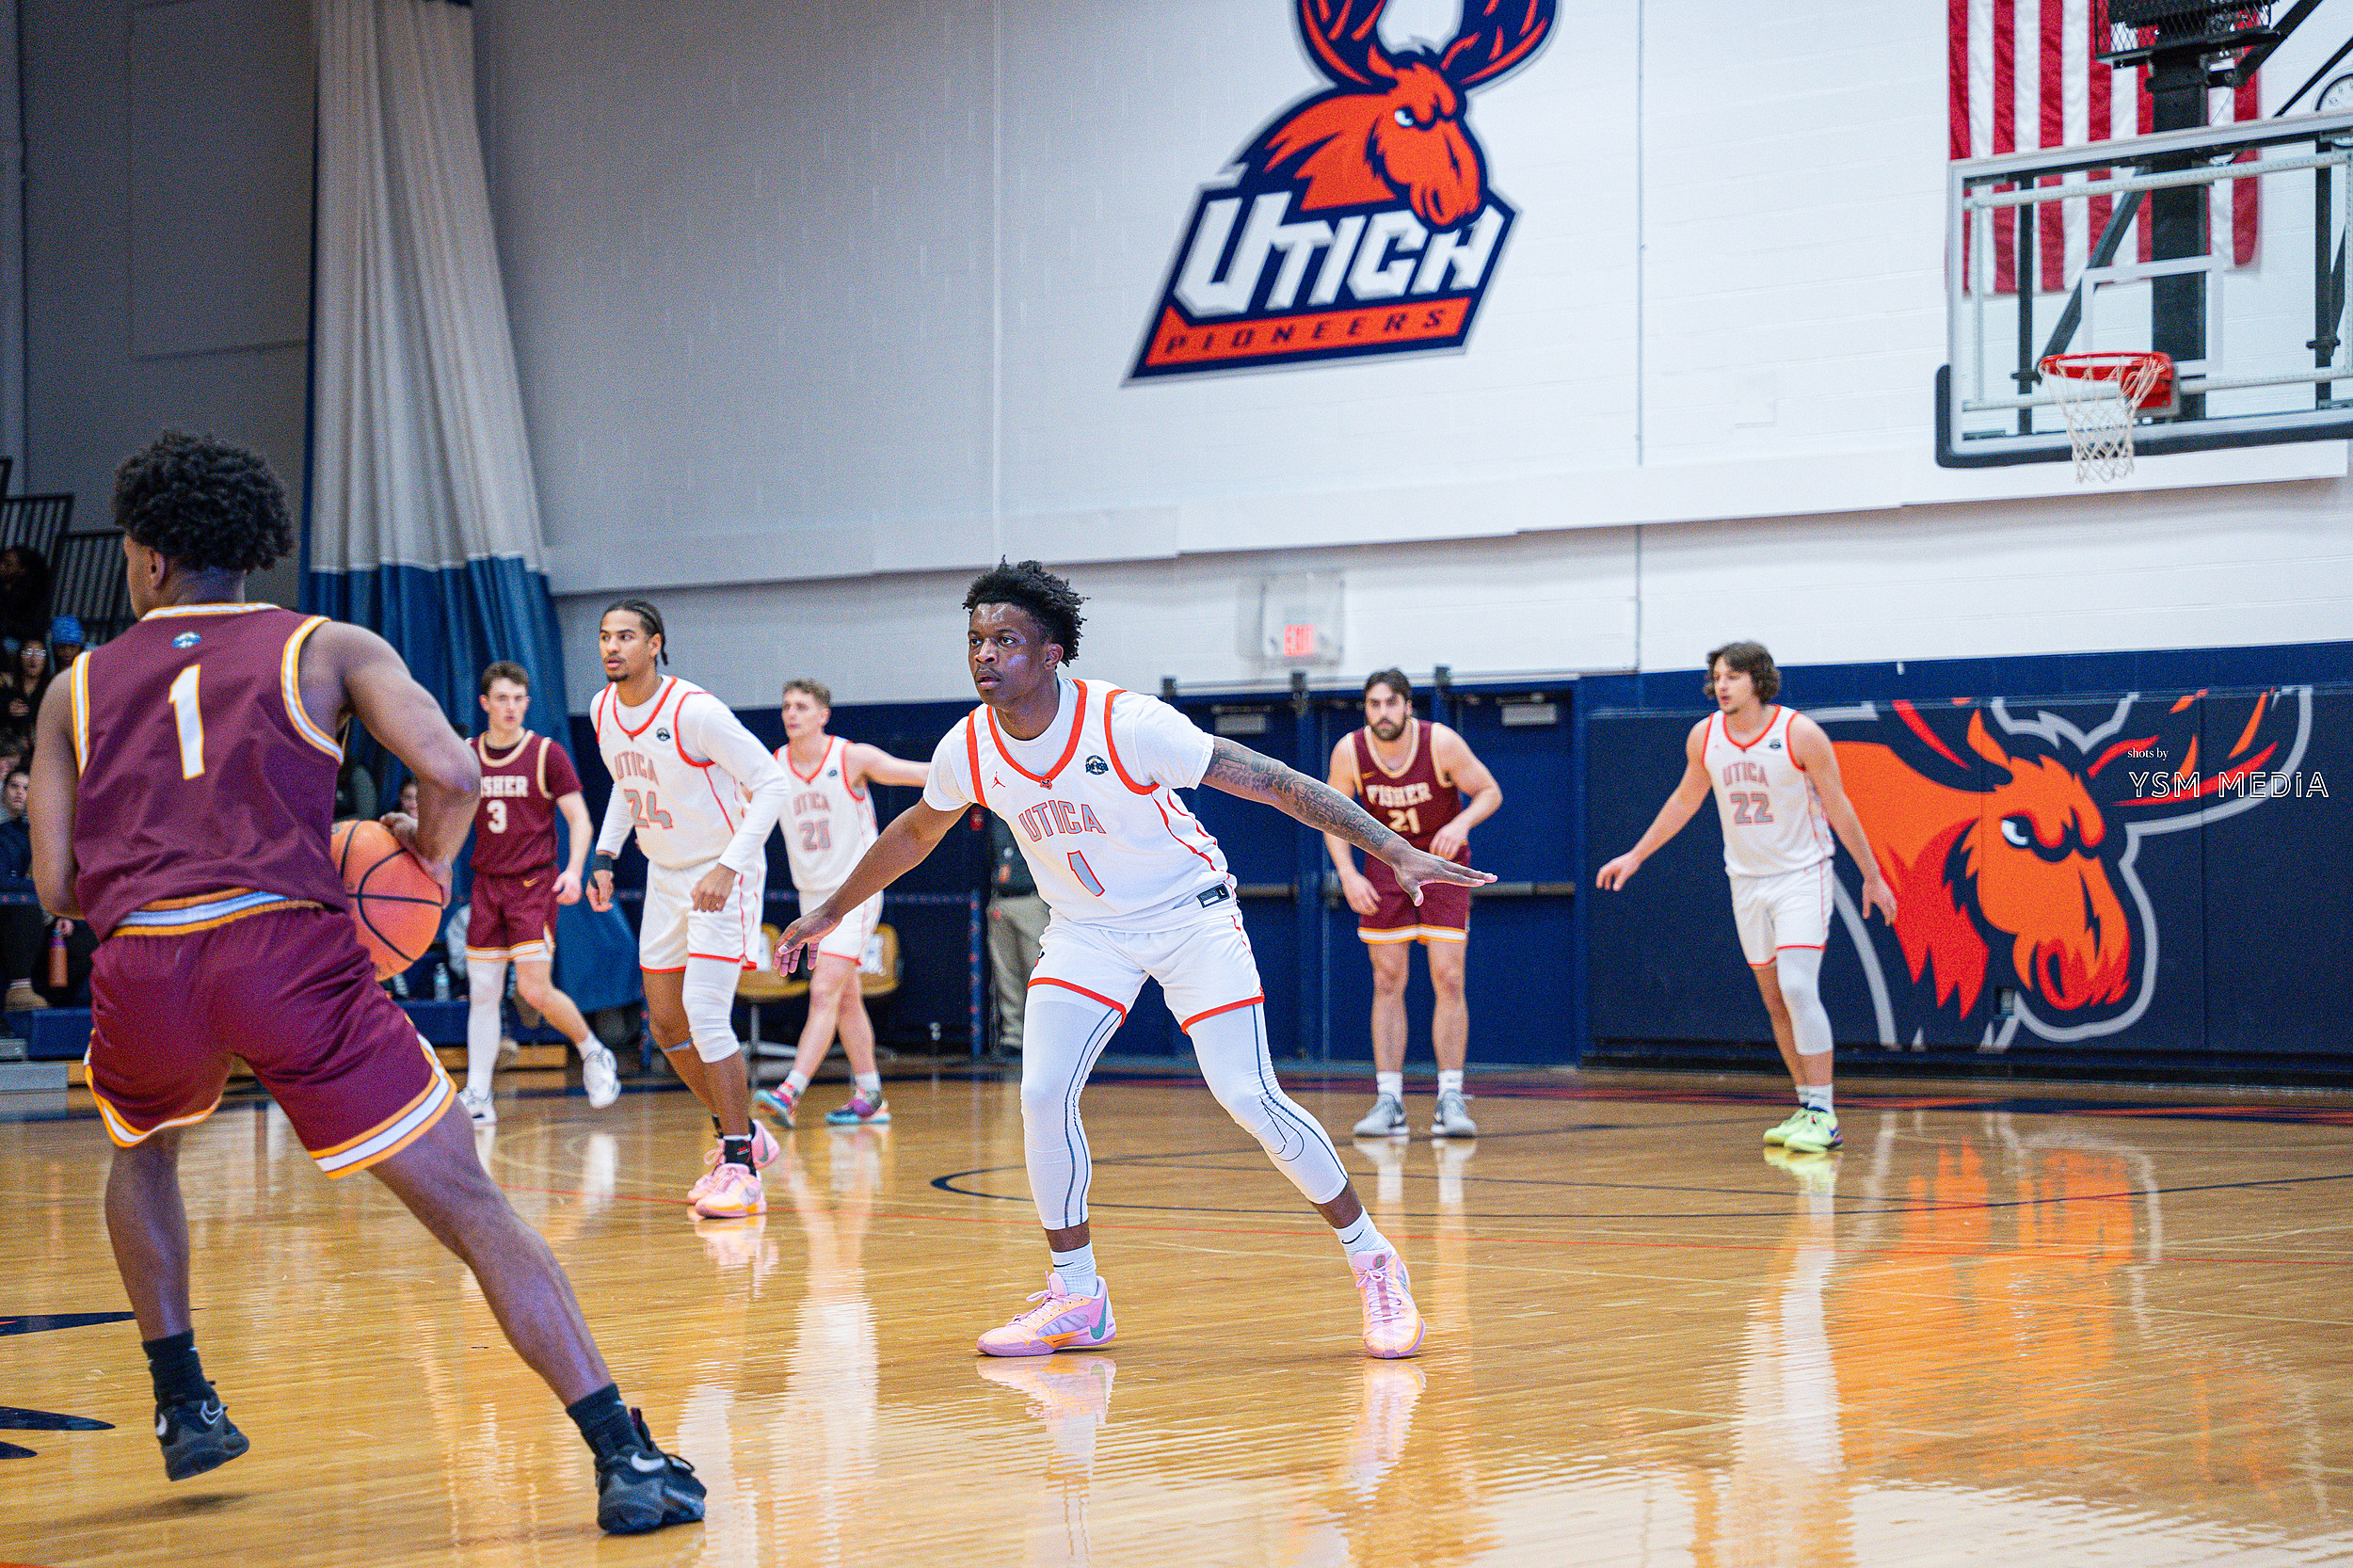 Just How Good are Utica University Athletics This Year?